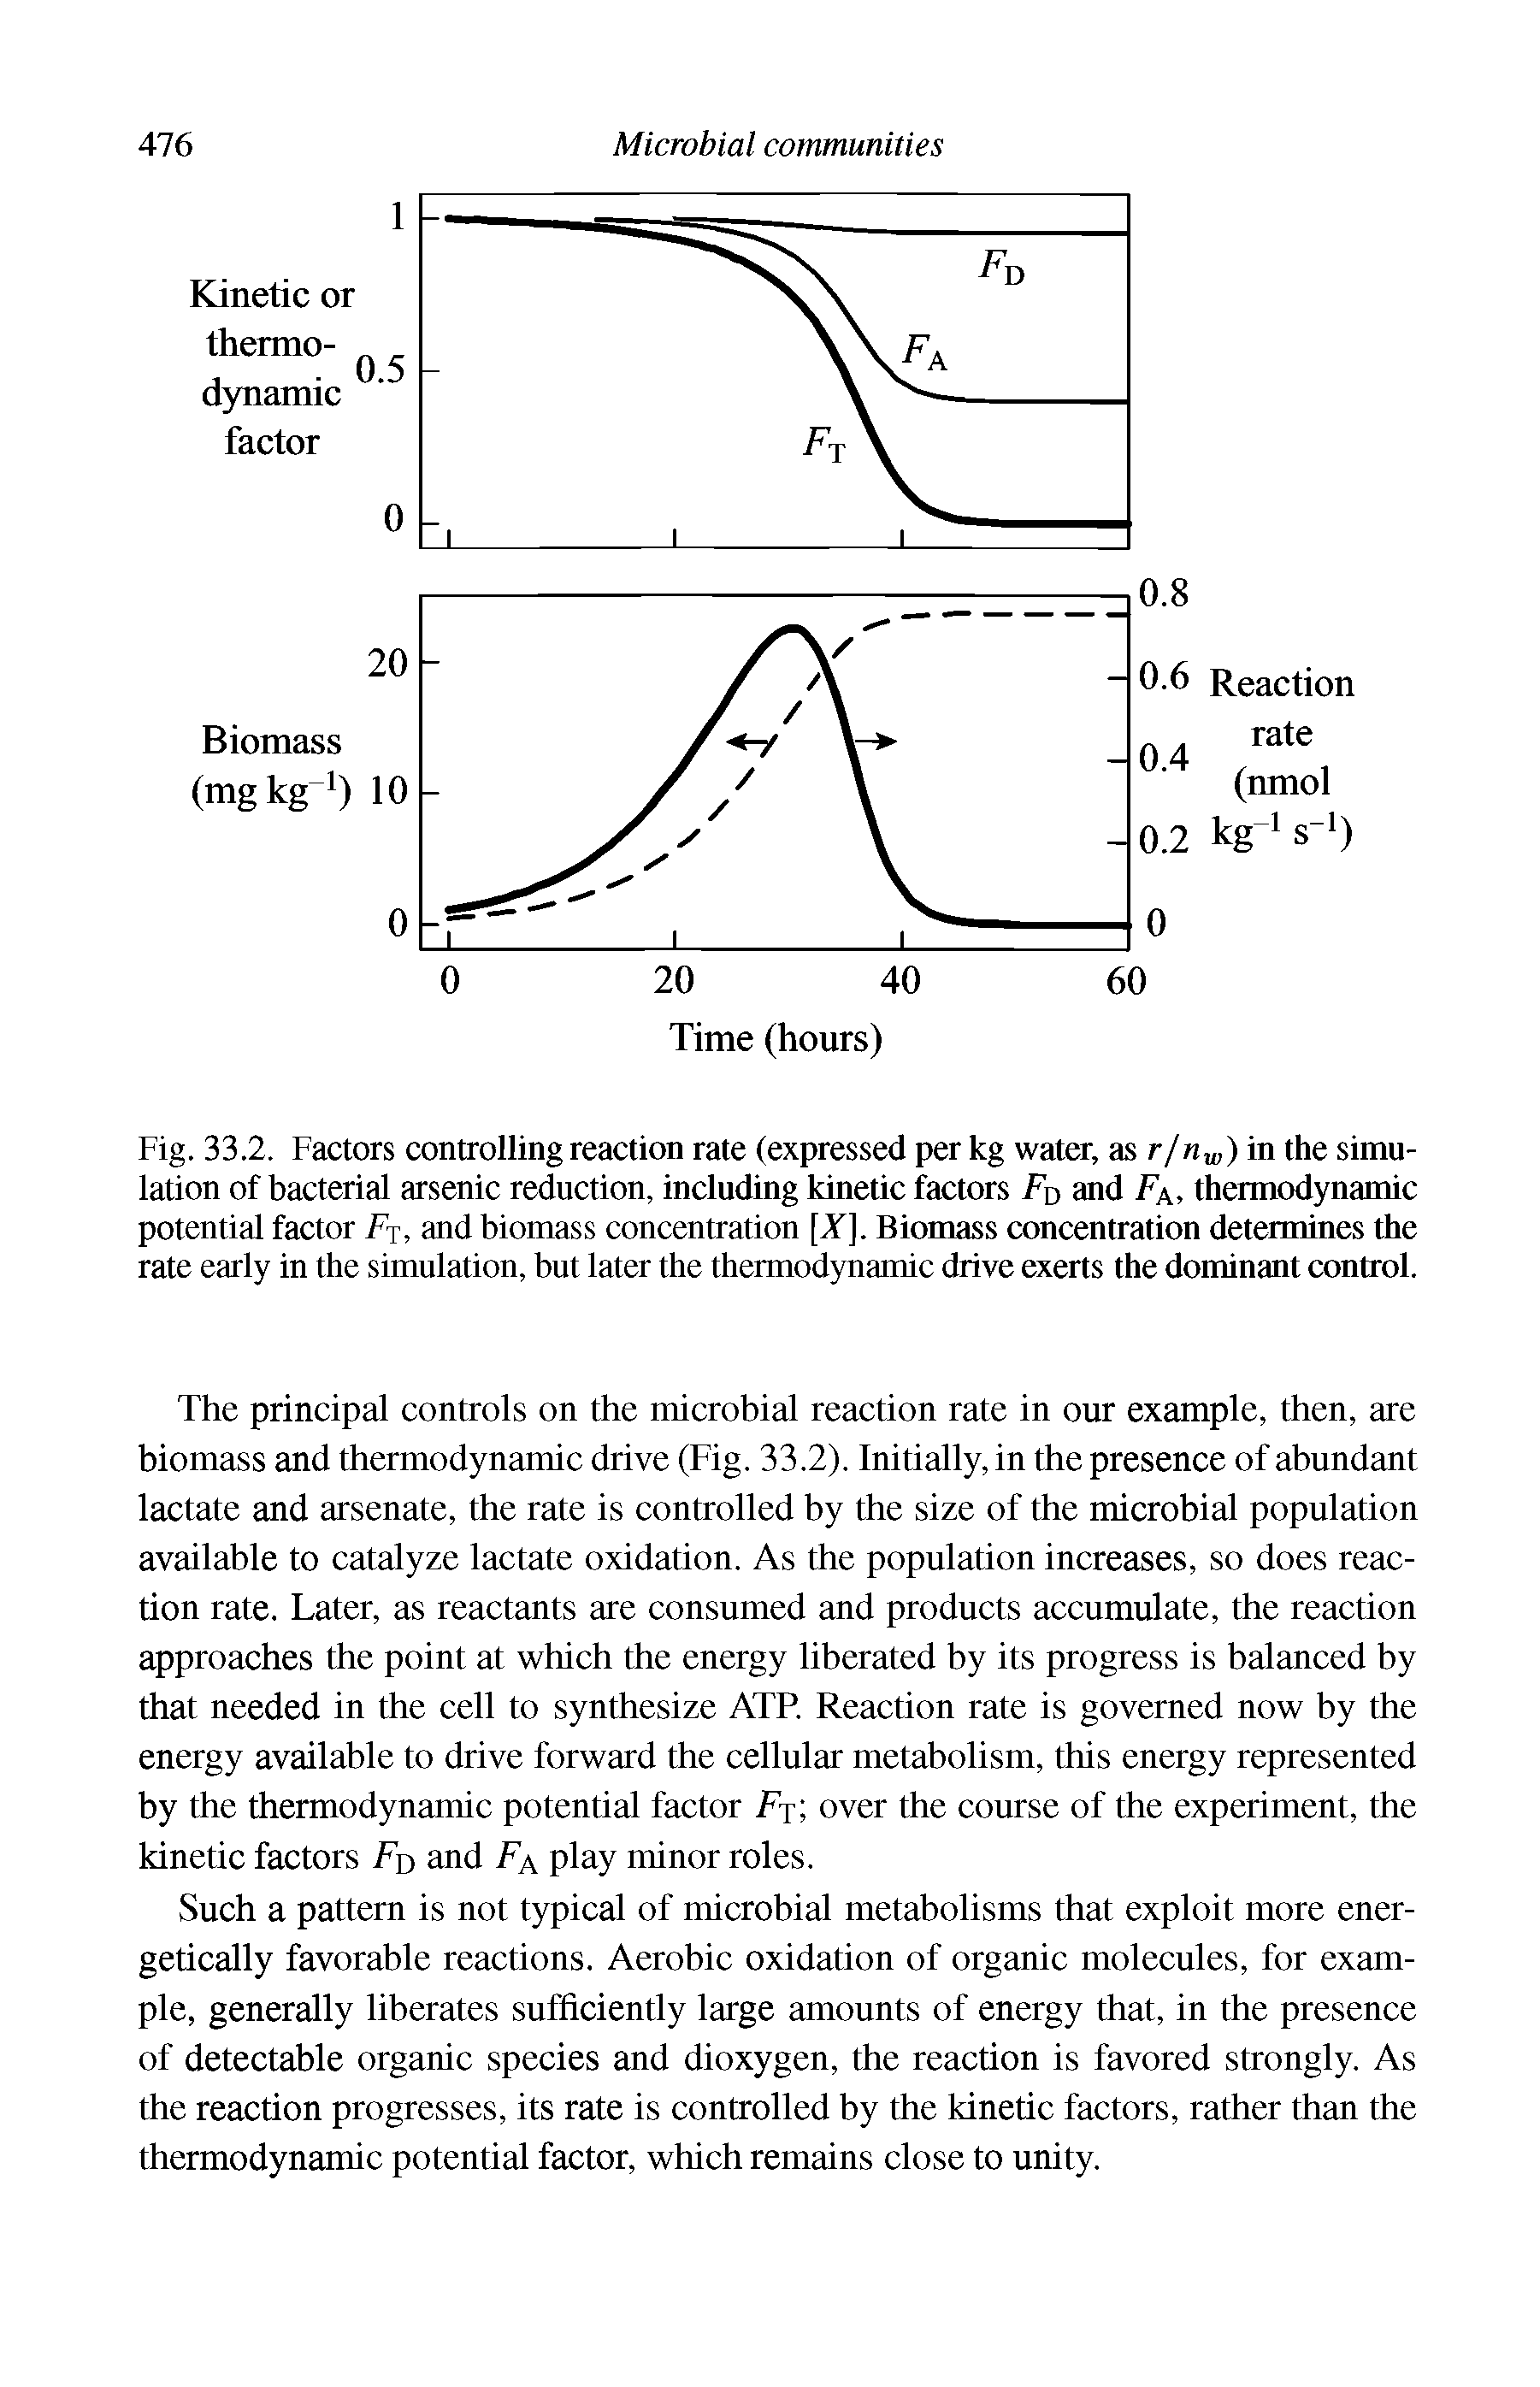 Fig. 33.2. Factors controlling reaction rate (expressed per kg water, as r/nw) in the simulation of bacterial arsenic reduction, including kinetic factors FD and Fa, thermodynamic potential factor FT, and biomass concentration [X], Biomass concentration determines the rate early in the simulation, but later the thermodynamic drive exerts the dominant control.